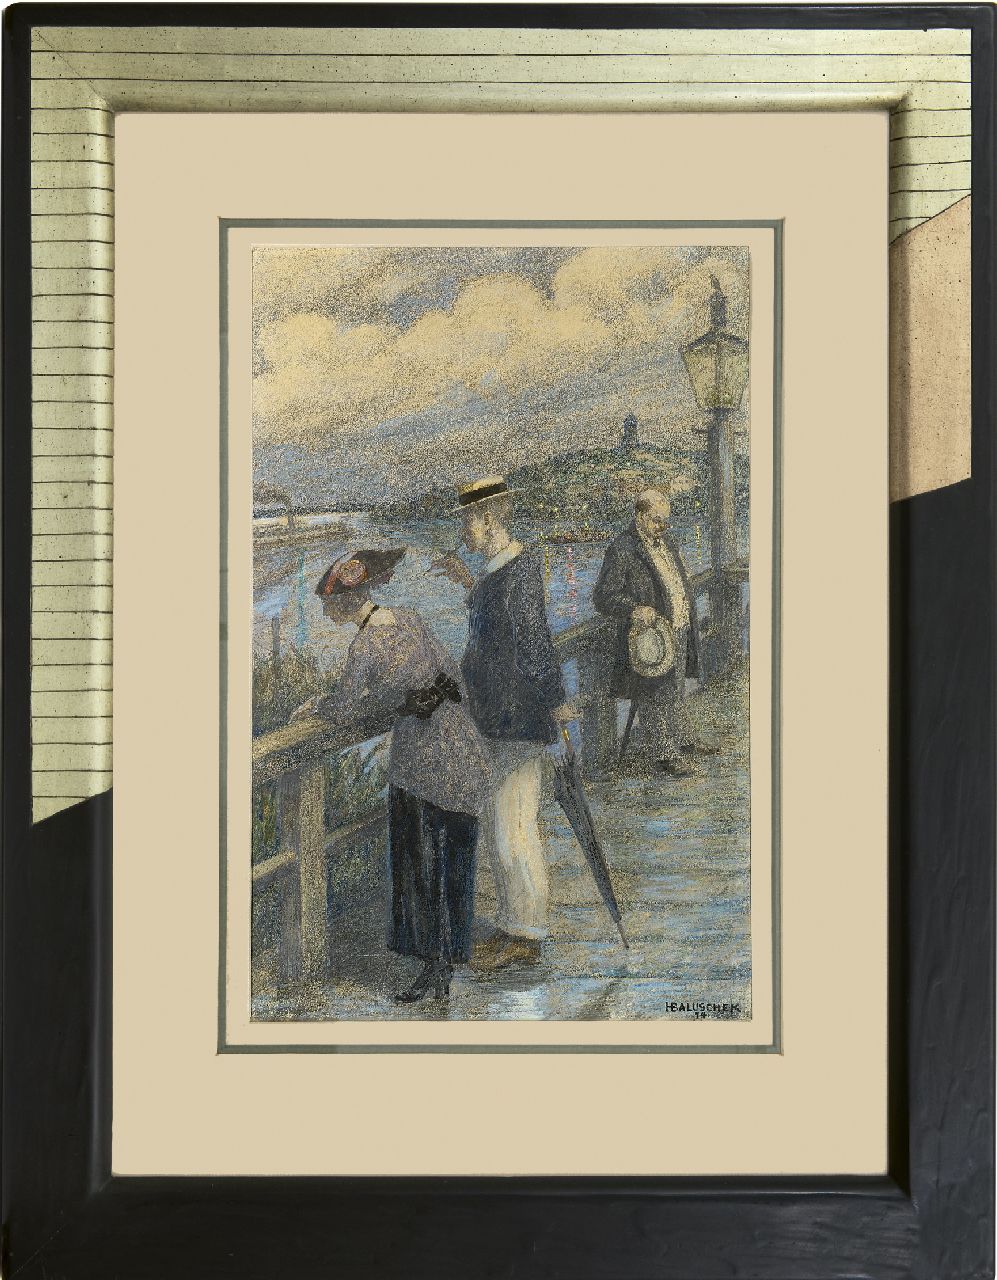 Baluschek H.  | Hans Baluschek | Watercolours and drawings offered for sale | Couple on the bridge, chalk and gouache on paper 48.5 x 33.0 cm, signed l.r. and dated '14